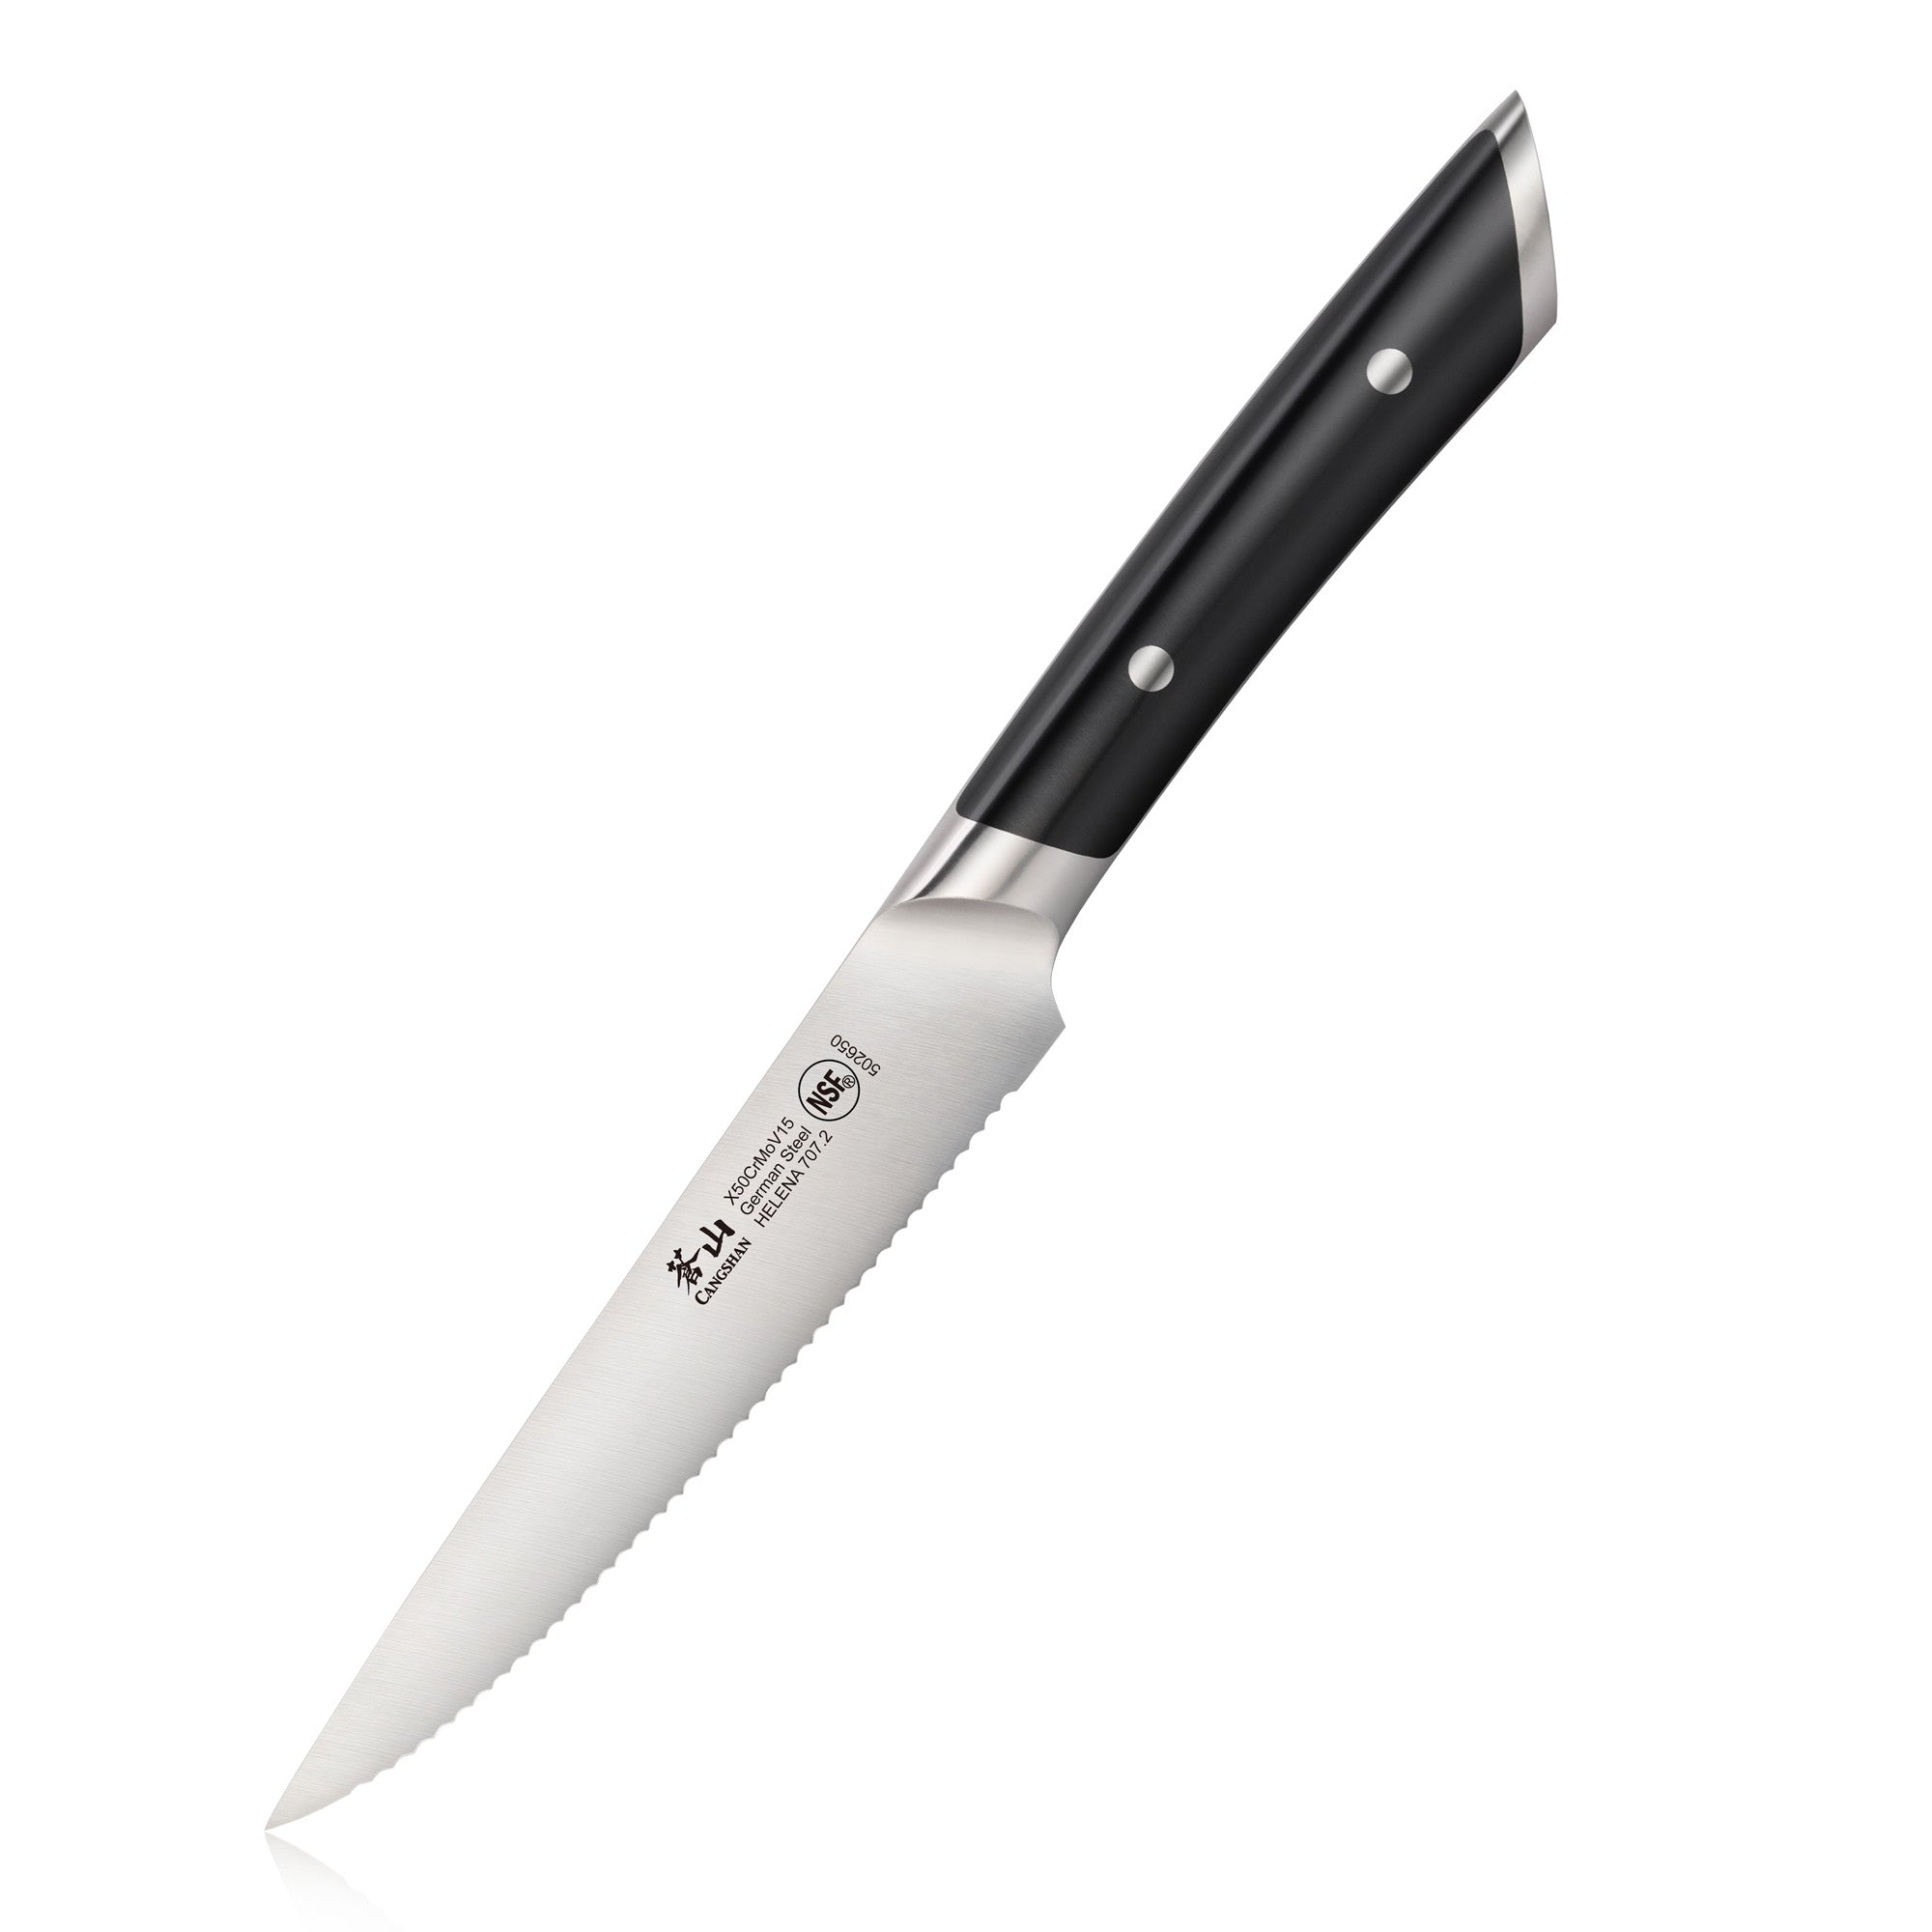 TURWHO 5 Inch Kitchen Utility Knives German 1.4116 Stainless Steel